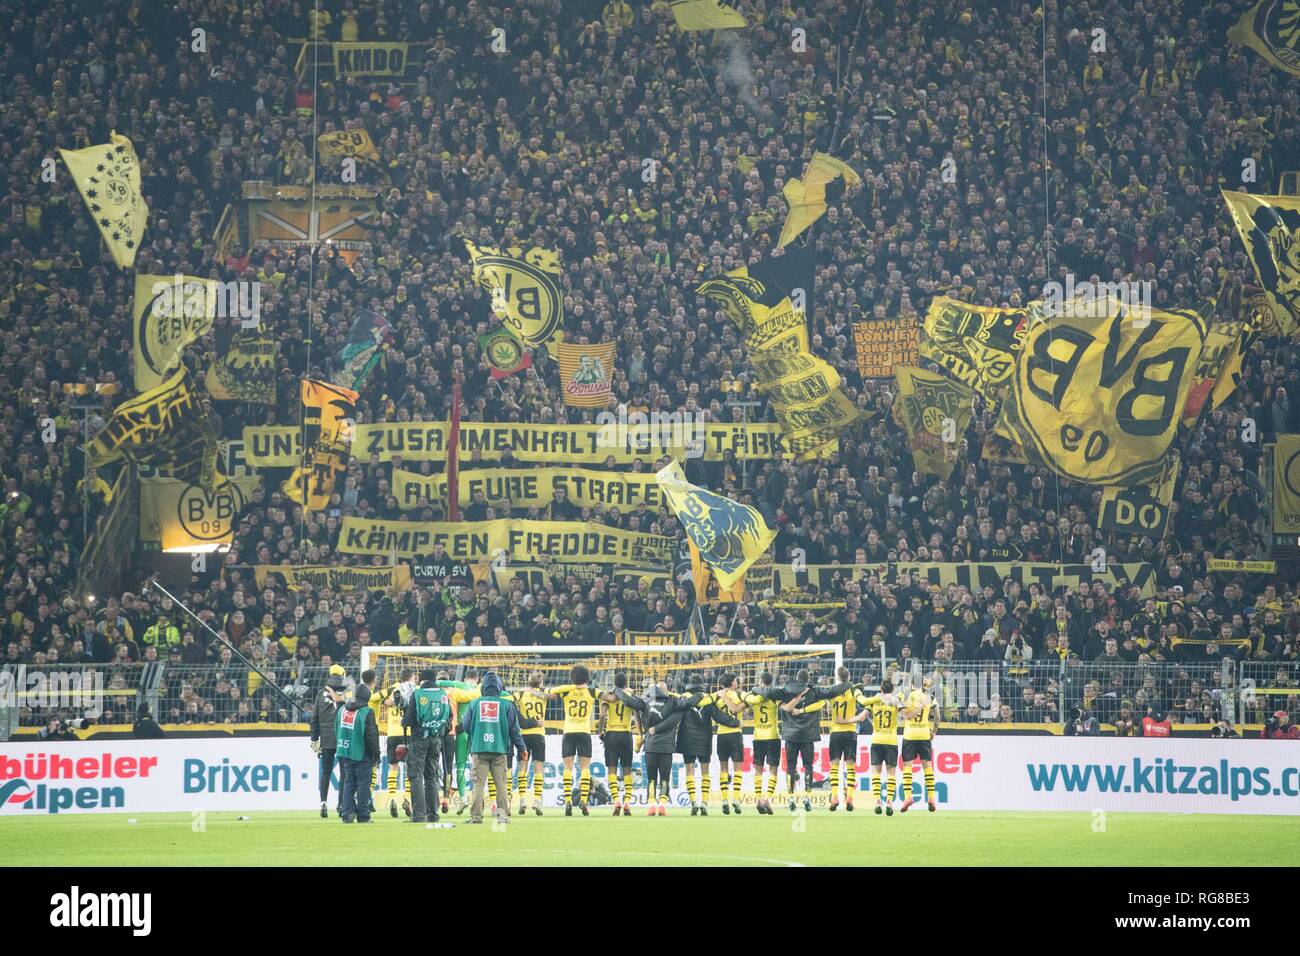 The Dortmund players cheer in front of the fans of the Suedtribuene and celebrate the victory, svºdtribvne, jubilation, cheer, cheering, joy, cheers, celebrate, final jubilation, full figure, fan, fans, spectators, supporters, supporters, football 1st Bundesliga, 19 Matchday, Borussia Dortmund (DO) - Hanover 96 (H) 5: 1, on 26.01.2019 in Dortmund/Germany. ¬ | usage worldwide Stock Photo